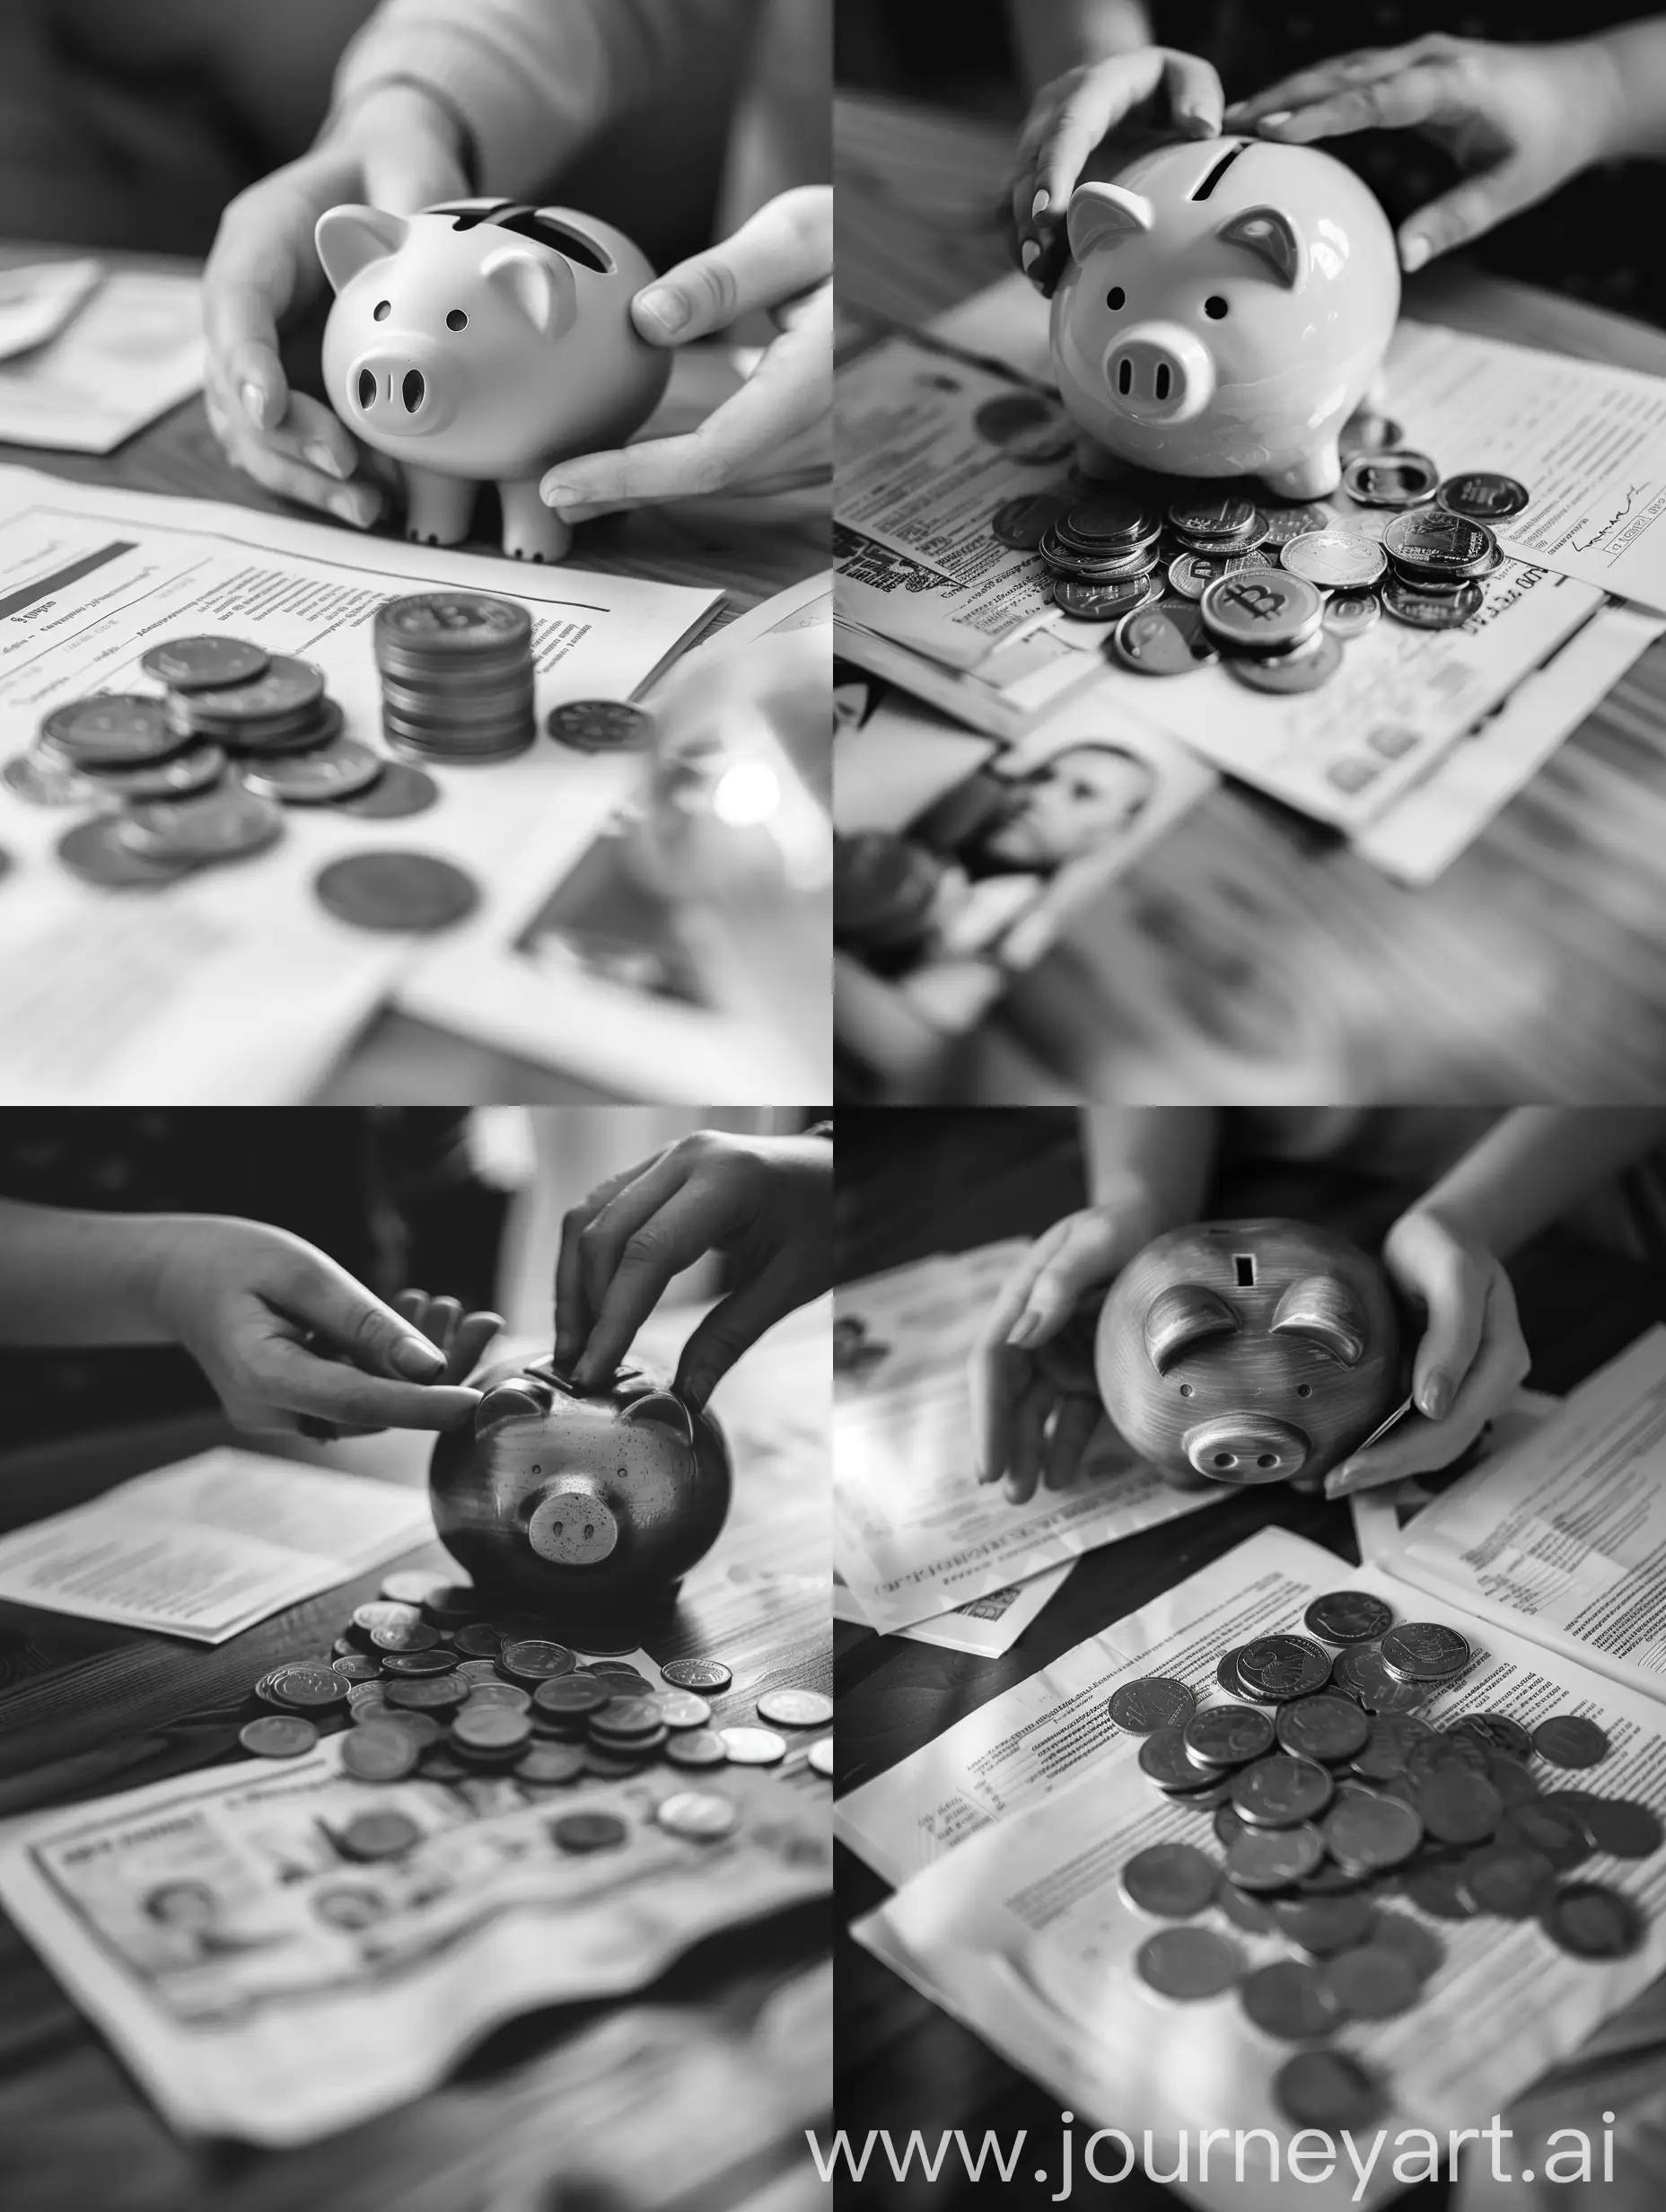 Professional-Photography-Hands-Arranging-Documents-in-Black-and-White-Piggy-Bank-Scene